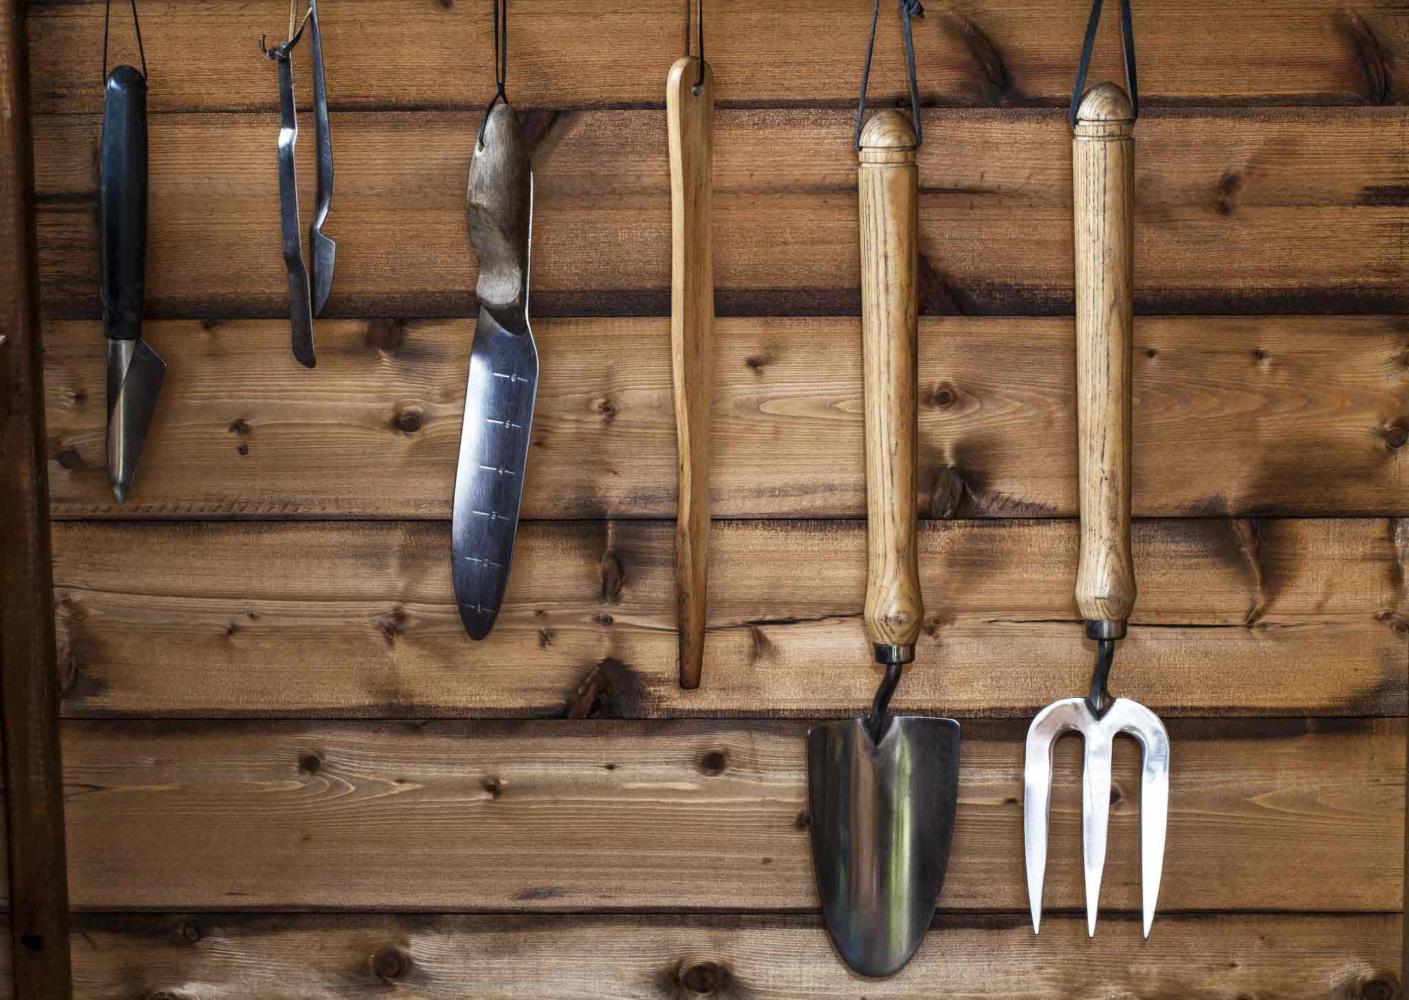 Close up of gardening tools hanging on a wooden wall.